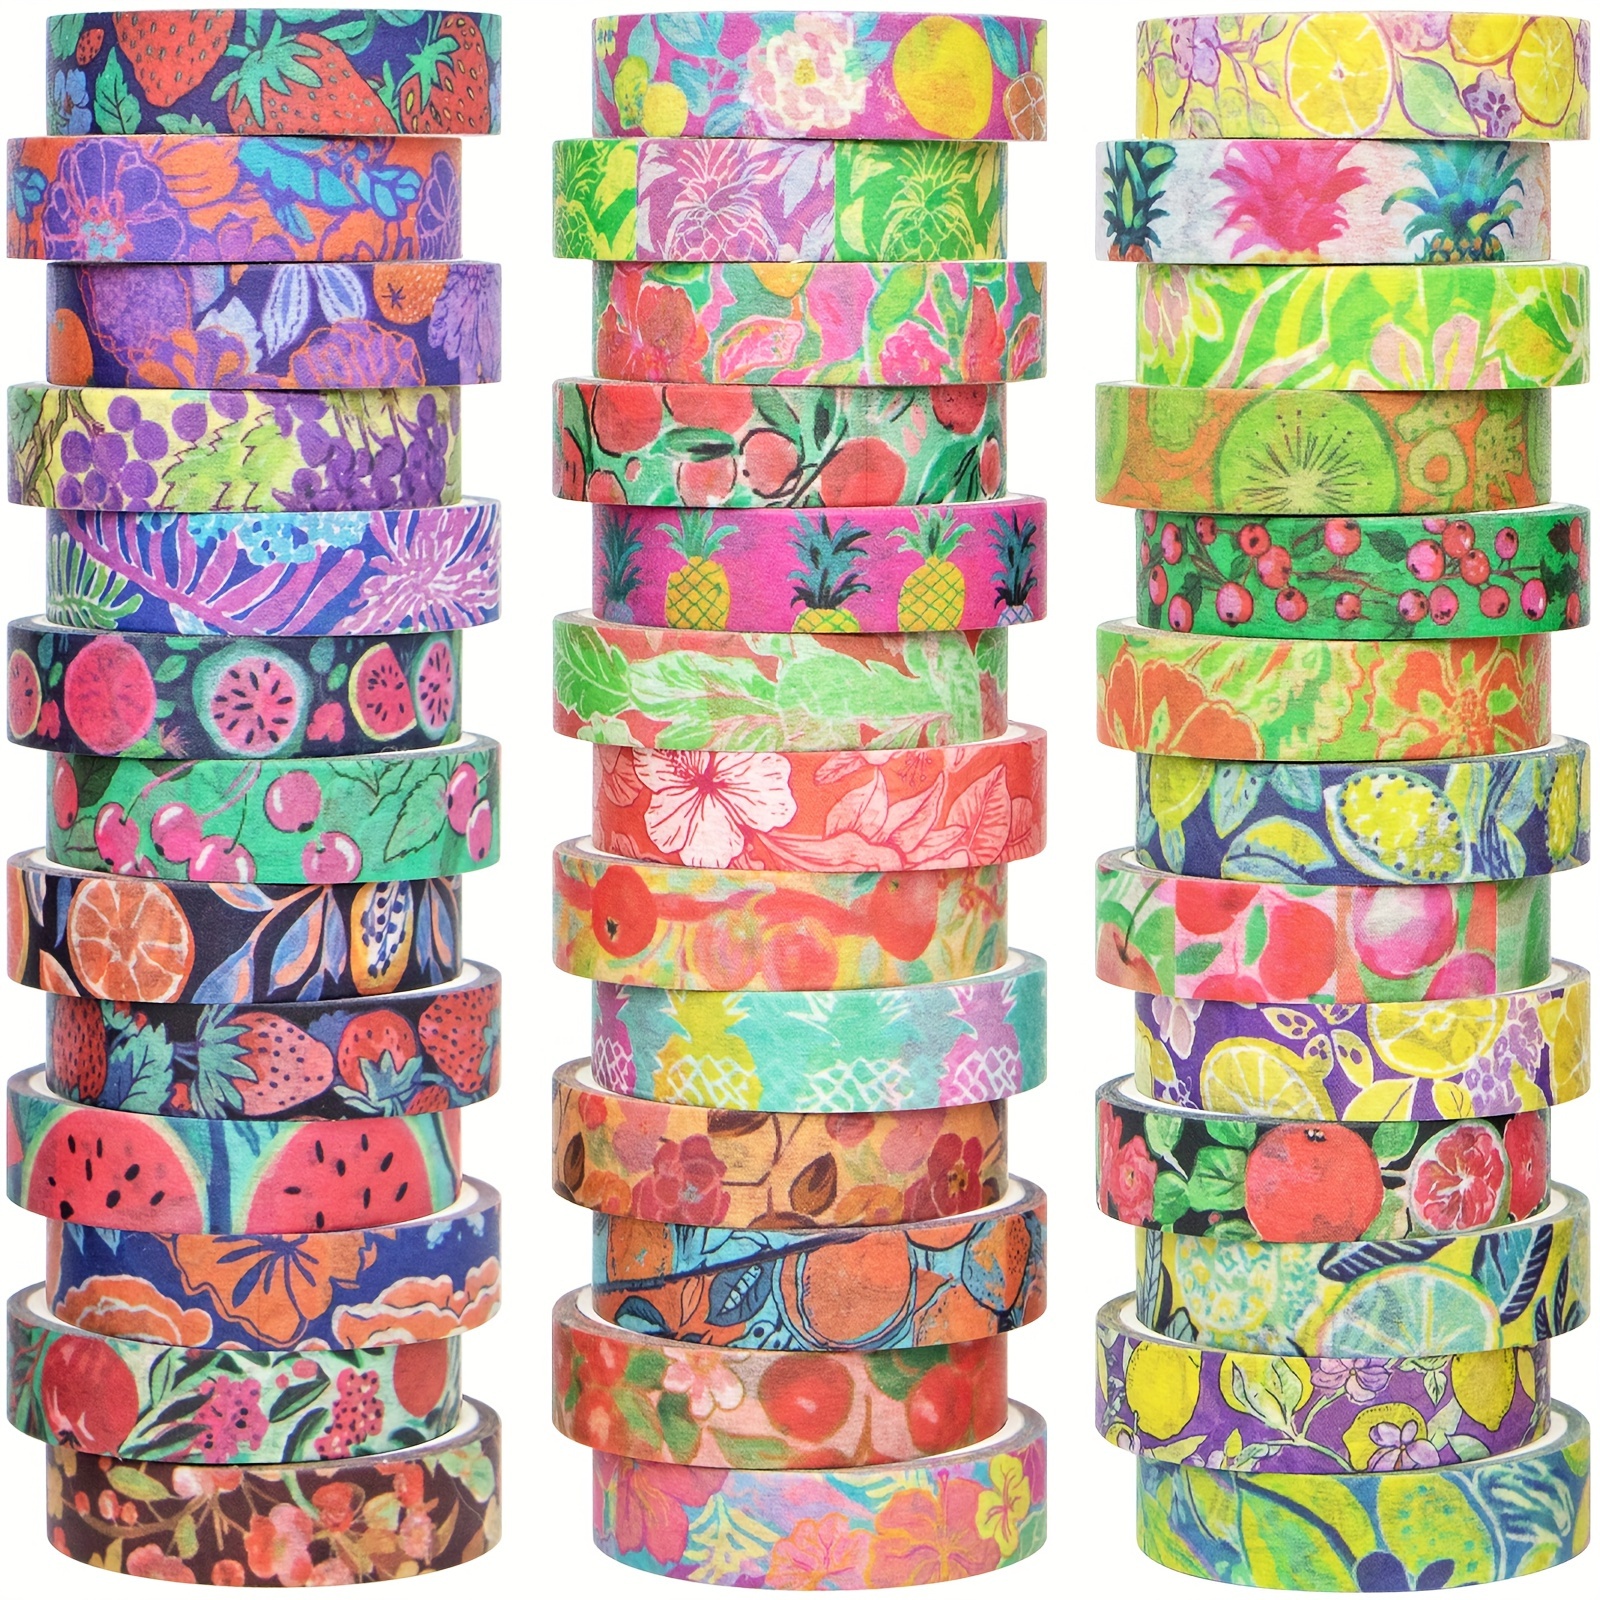 

48 Rolls Washi Tape Set, 10mm Wide Fruit Washi Tapes, Thin Decorative Adhesive Tape For Journaling, Scrapbooking Supplies, Kids Craft Tape, School Supplies